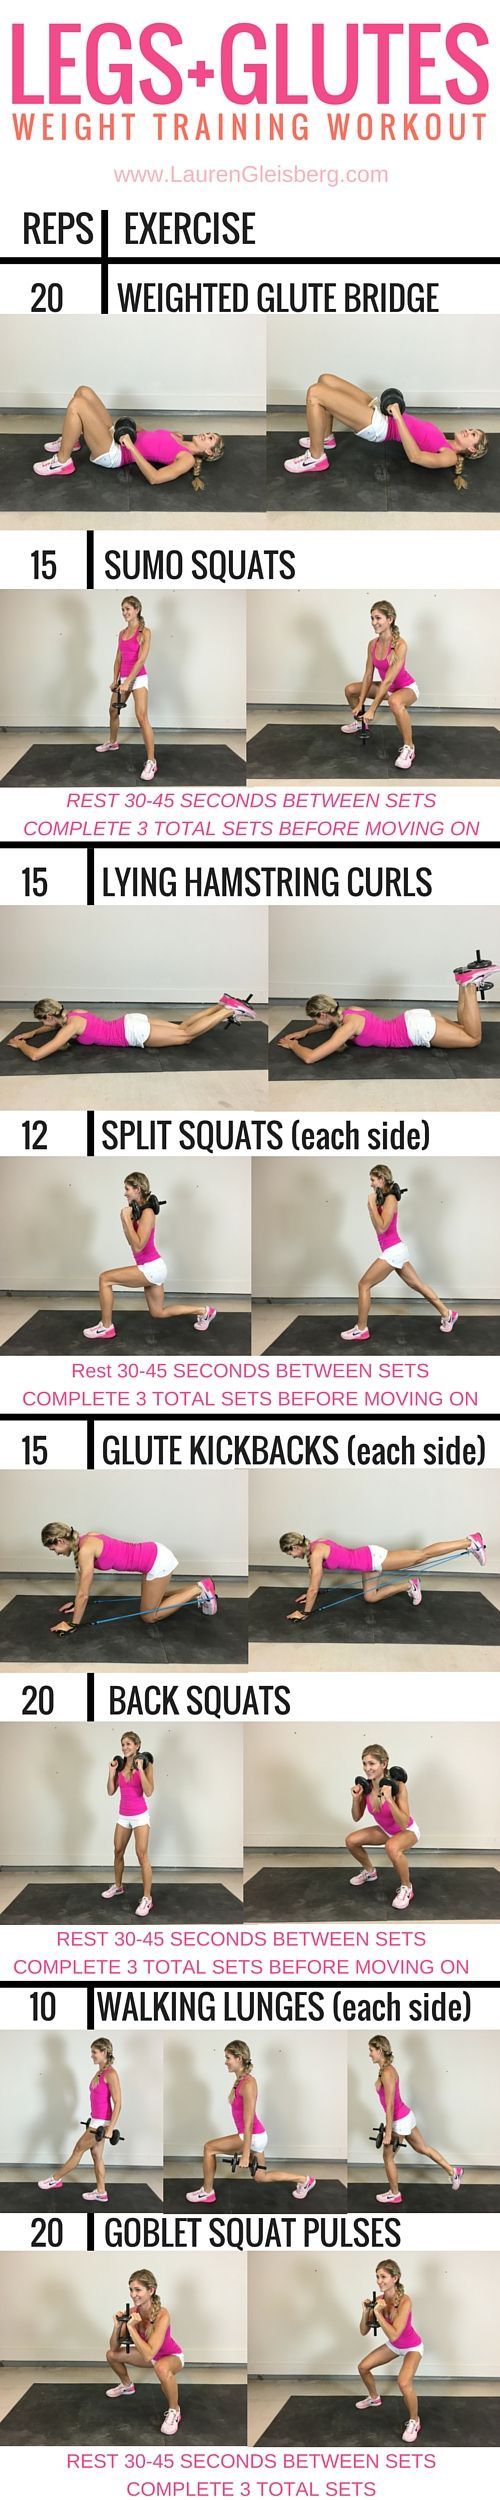 Love her workouts! Leg workout for home or gym